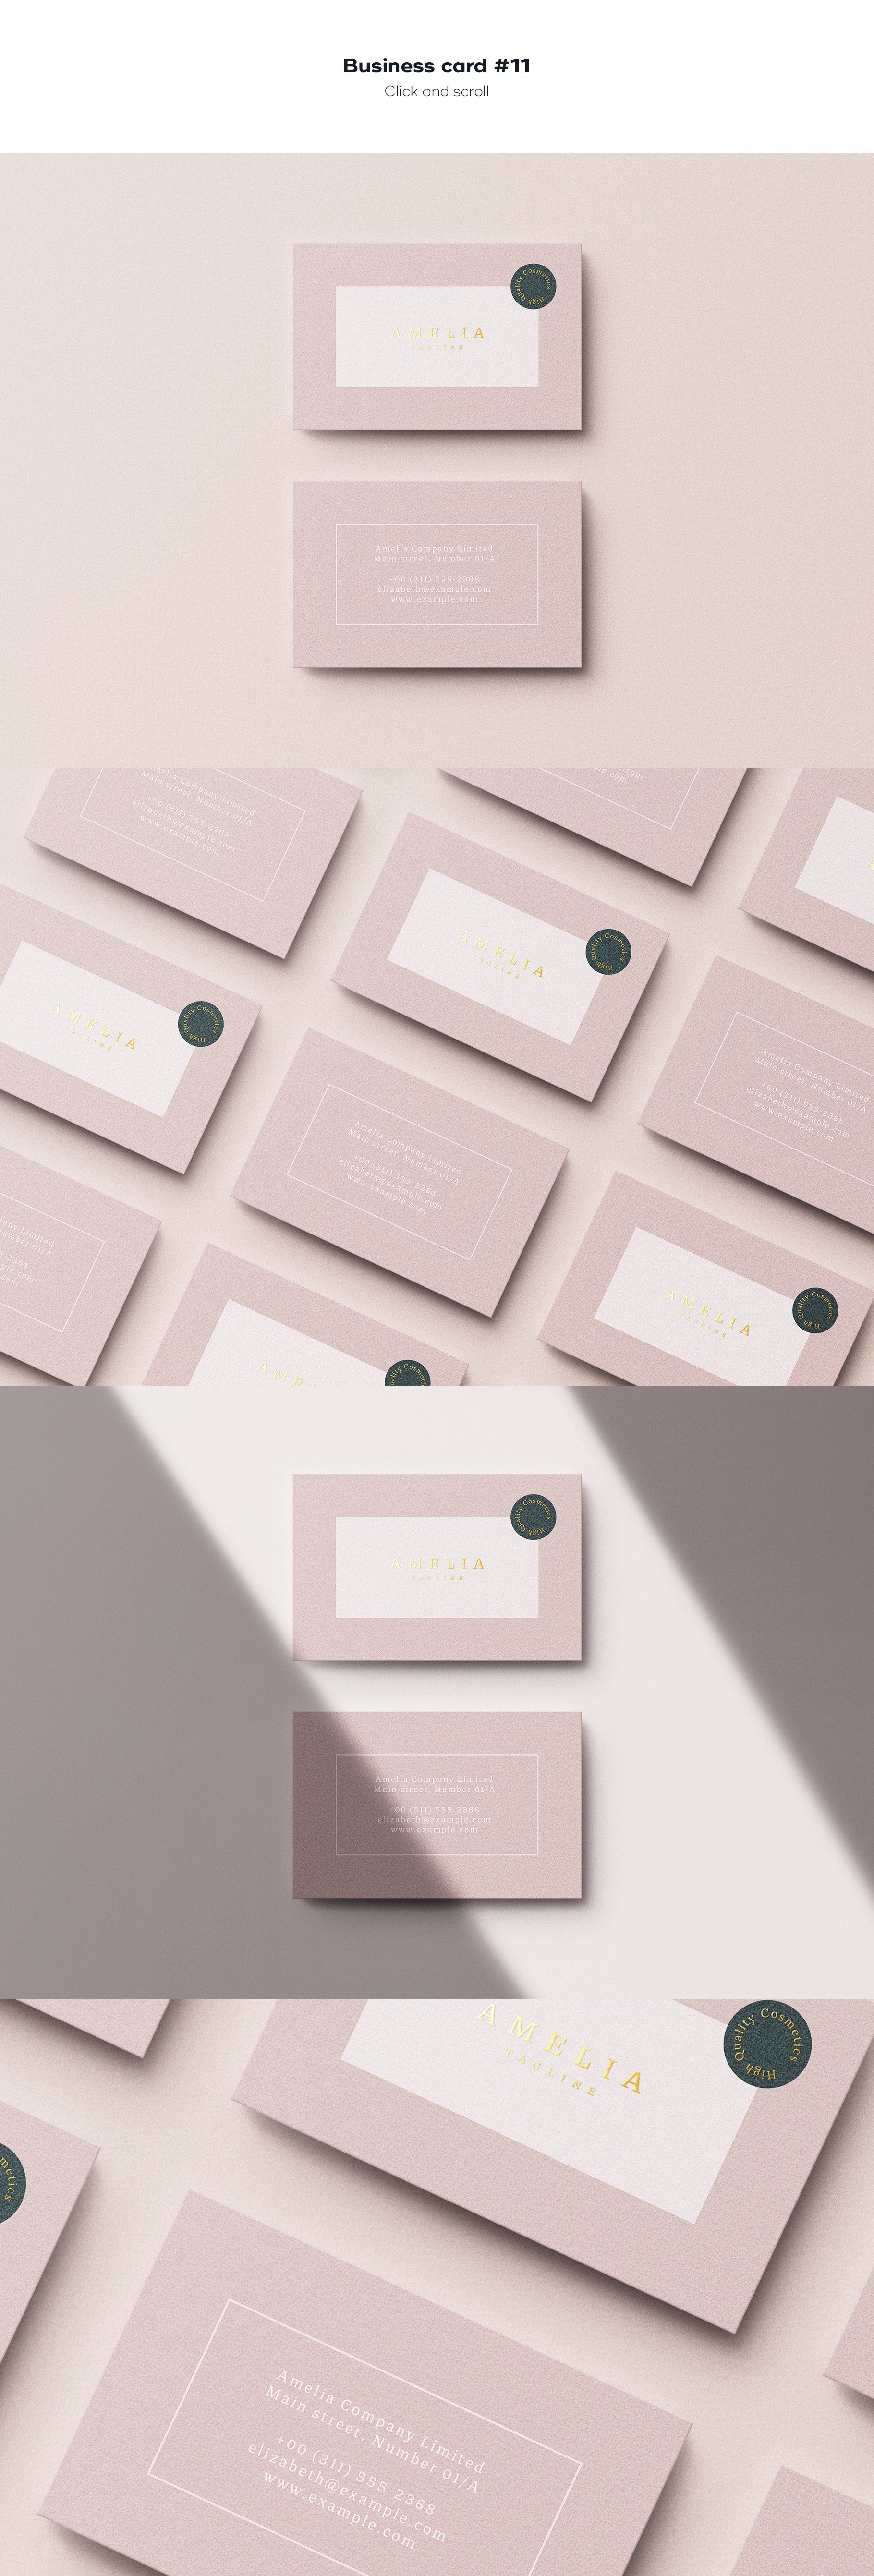 business card 11 841